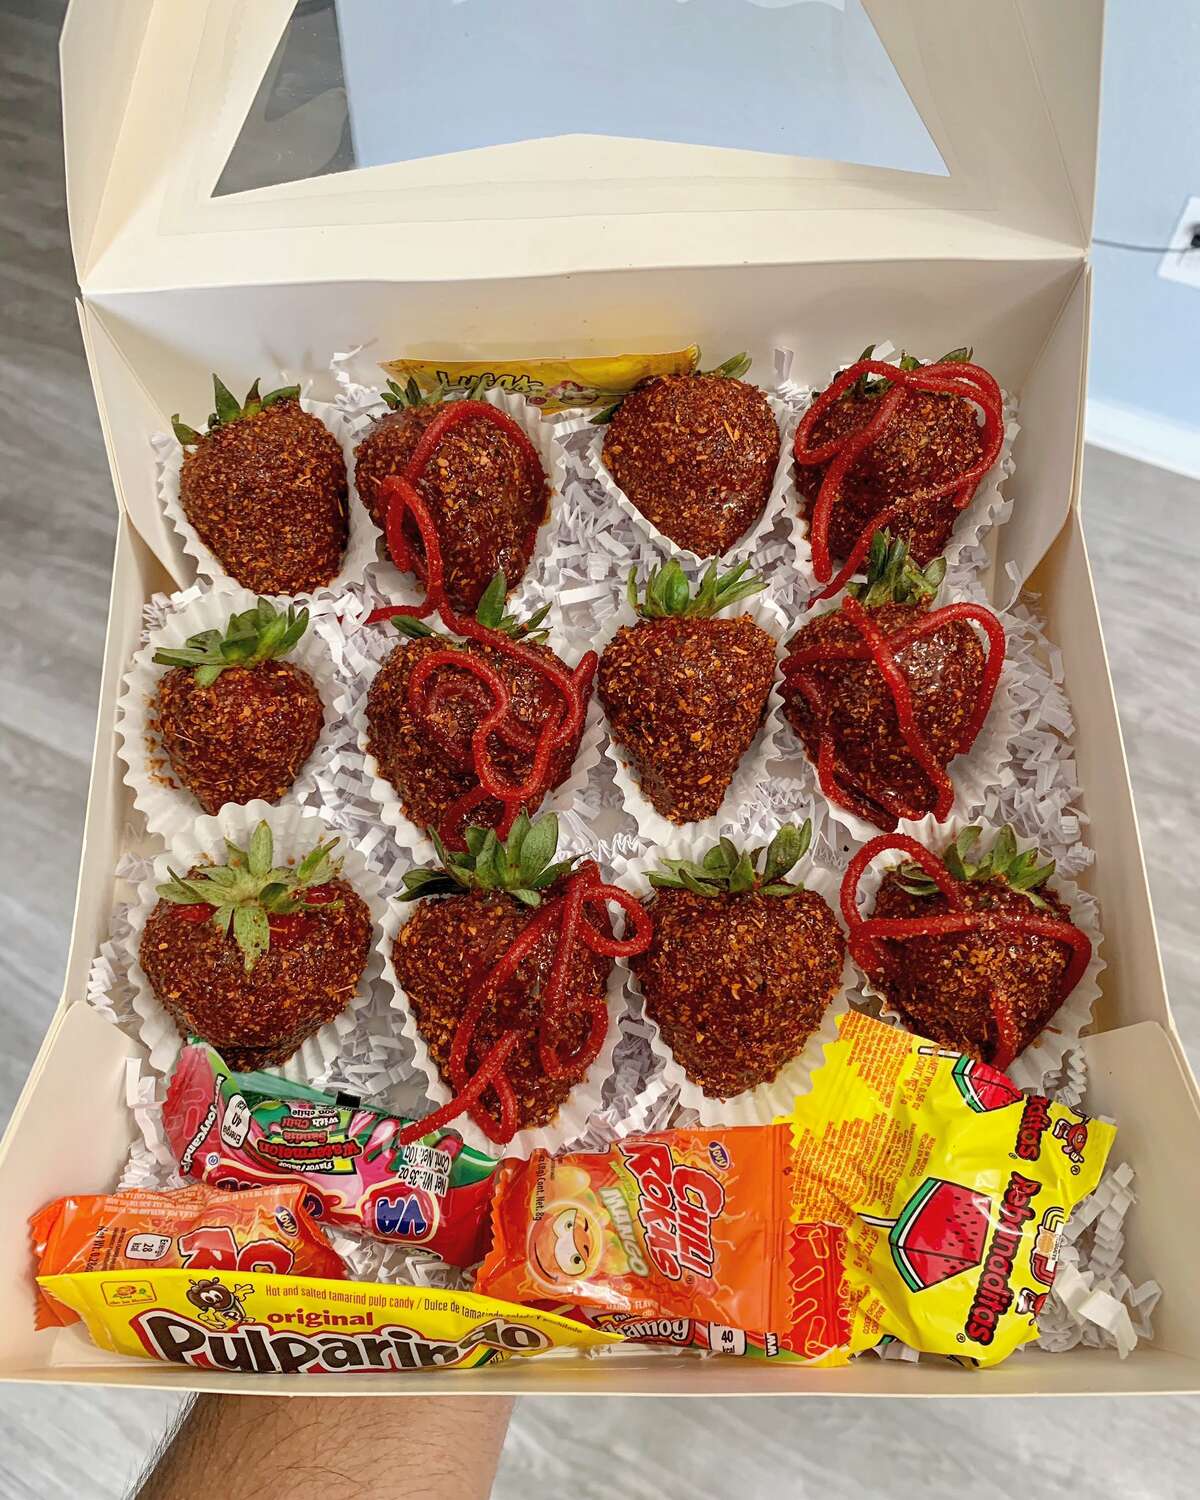 Holl's Chocolates Chocolate-Dipped Strawberries - Candace Lately